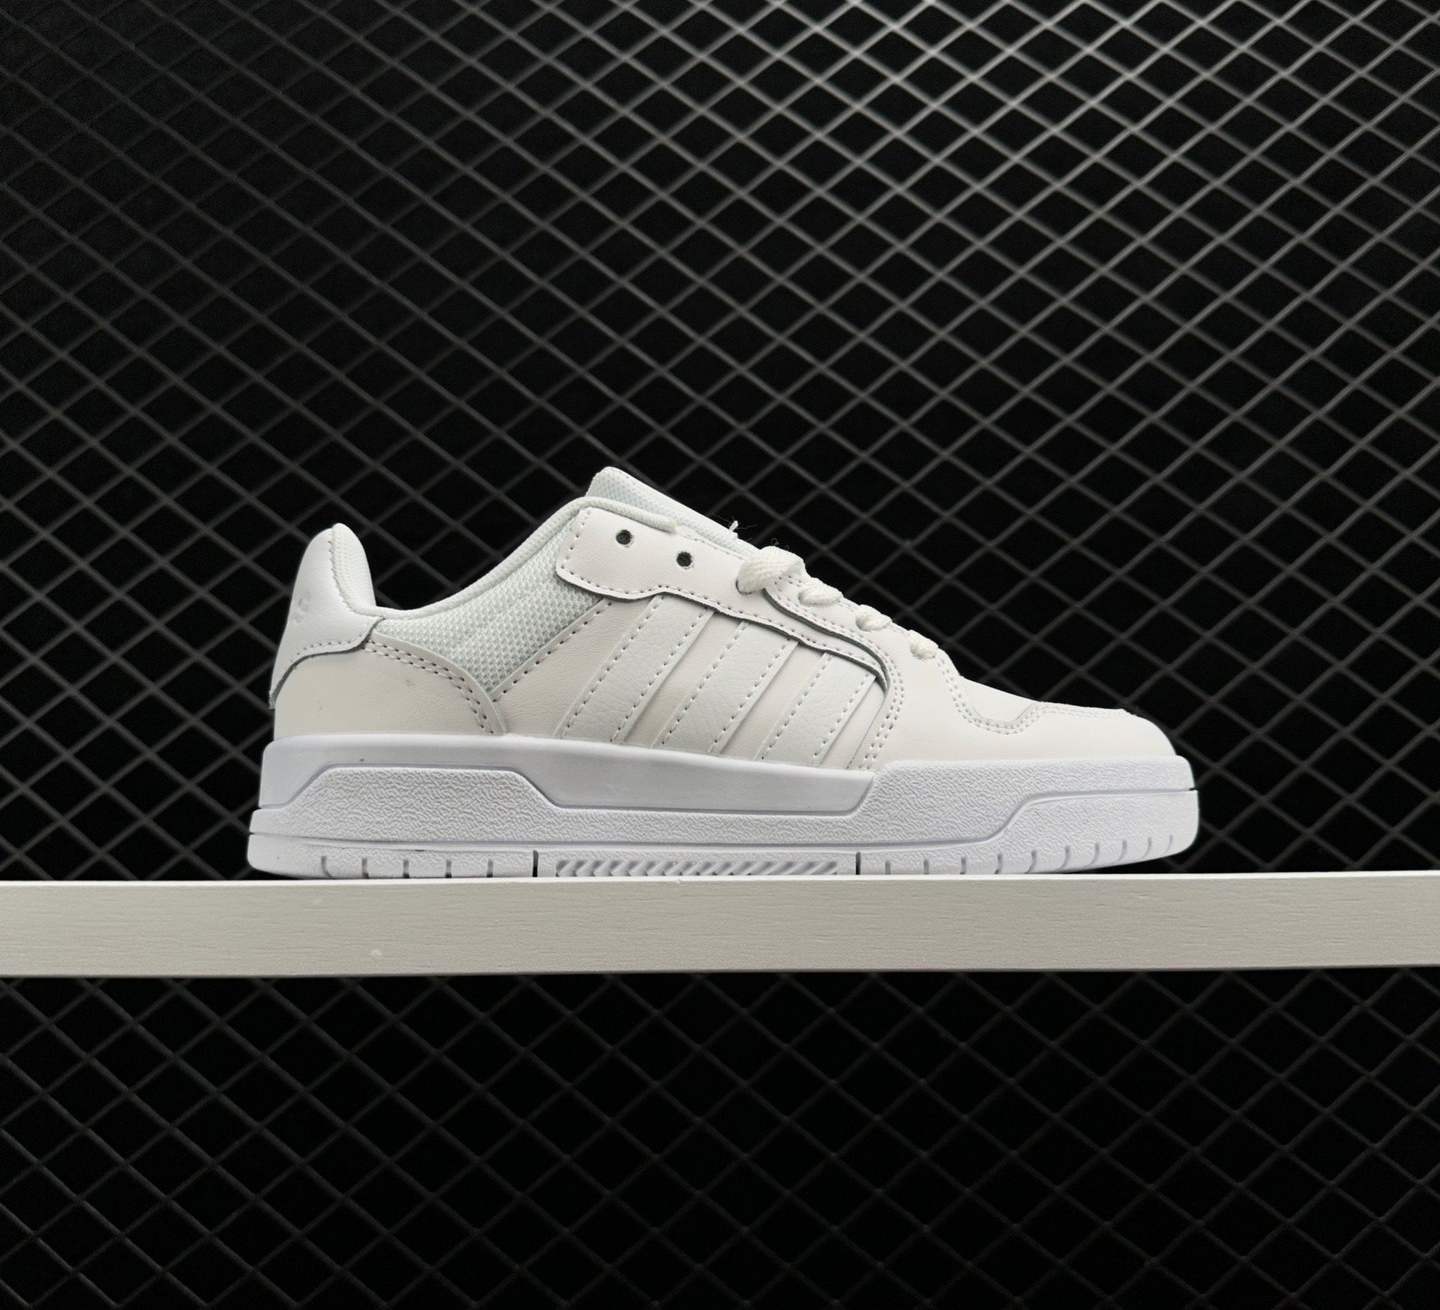 Adidas Neo Entrap White: Stylish and Comfortable Sneakers